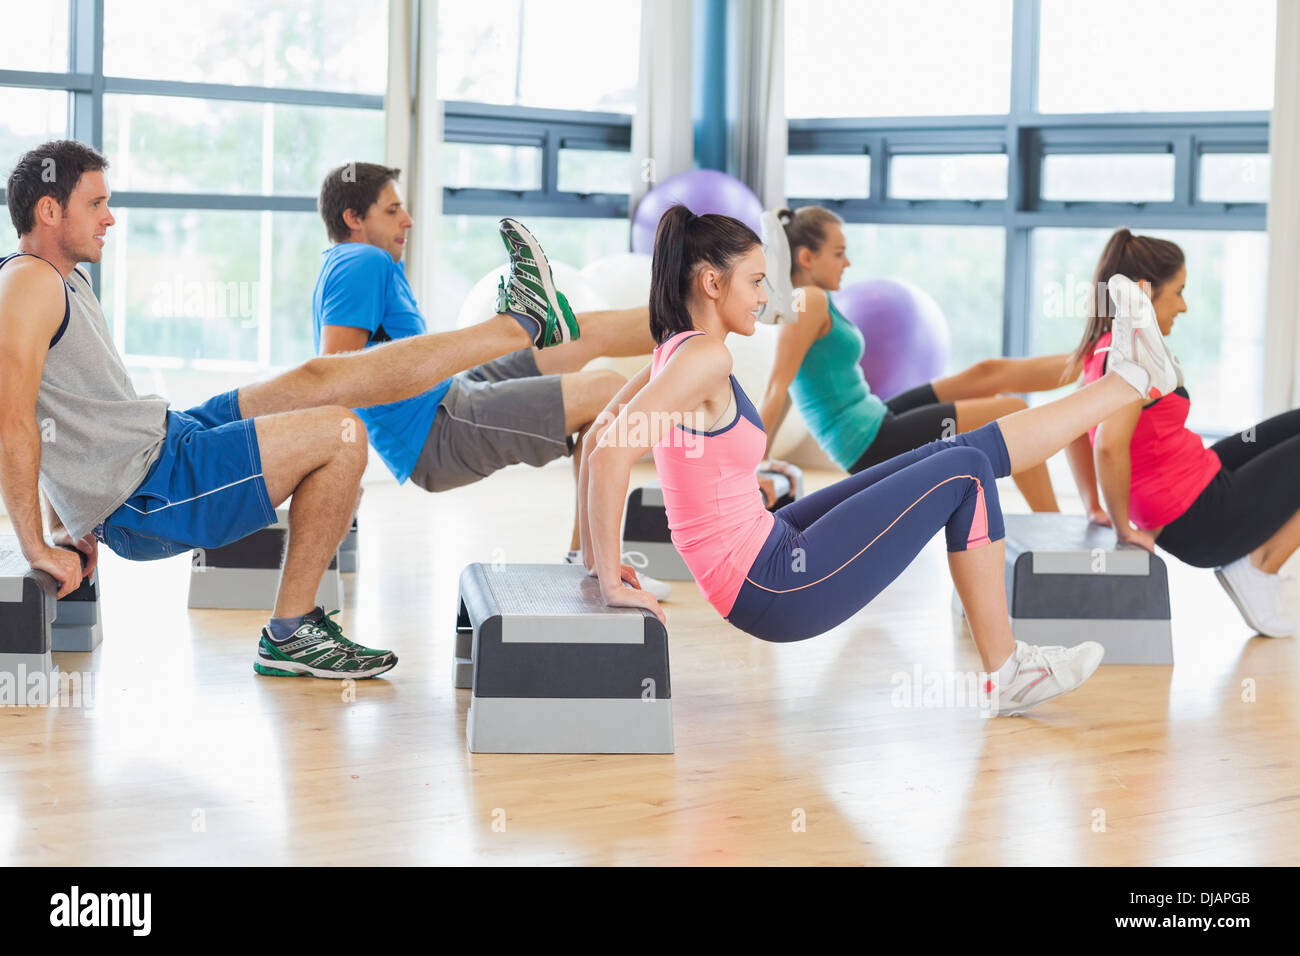 Instructor with fitness class performing step aerobics exercise Stock Photo